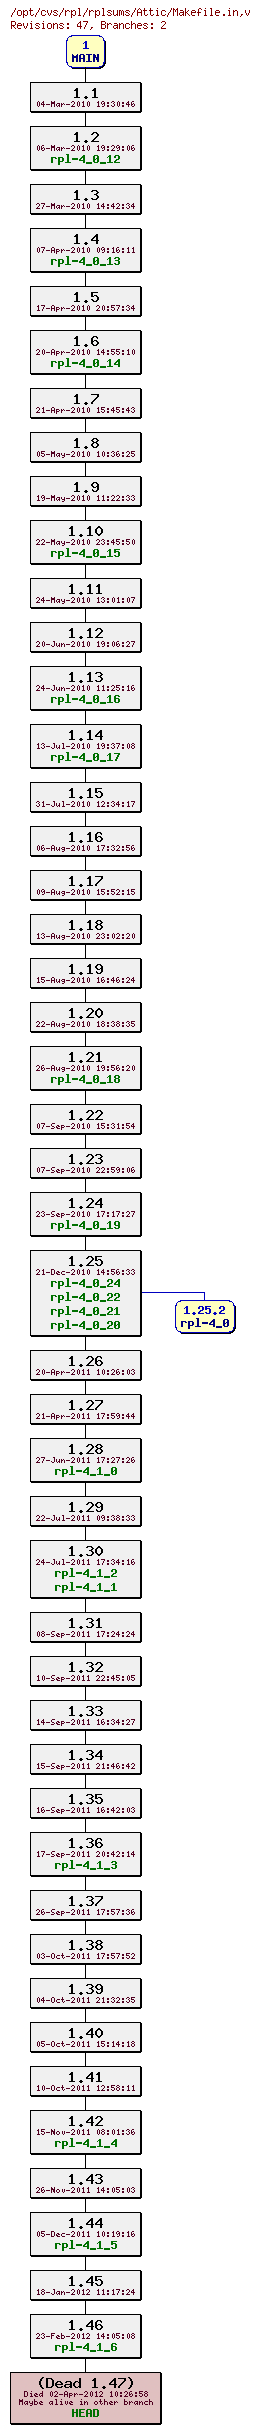 Revision graph of rpl/rplsums/Attic/Makefile.in